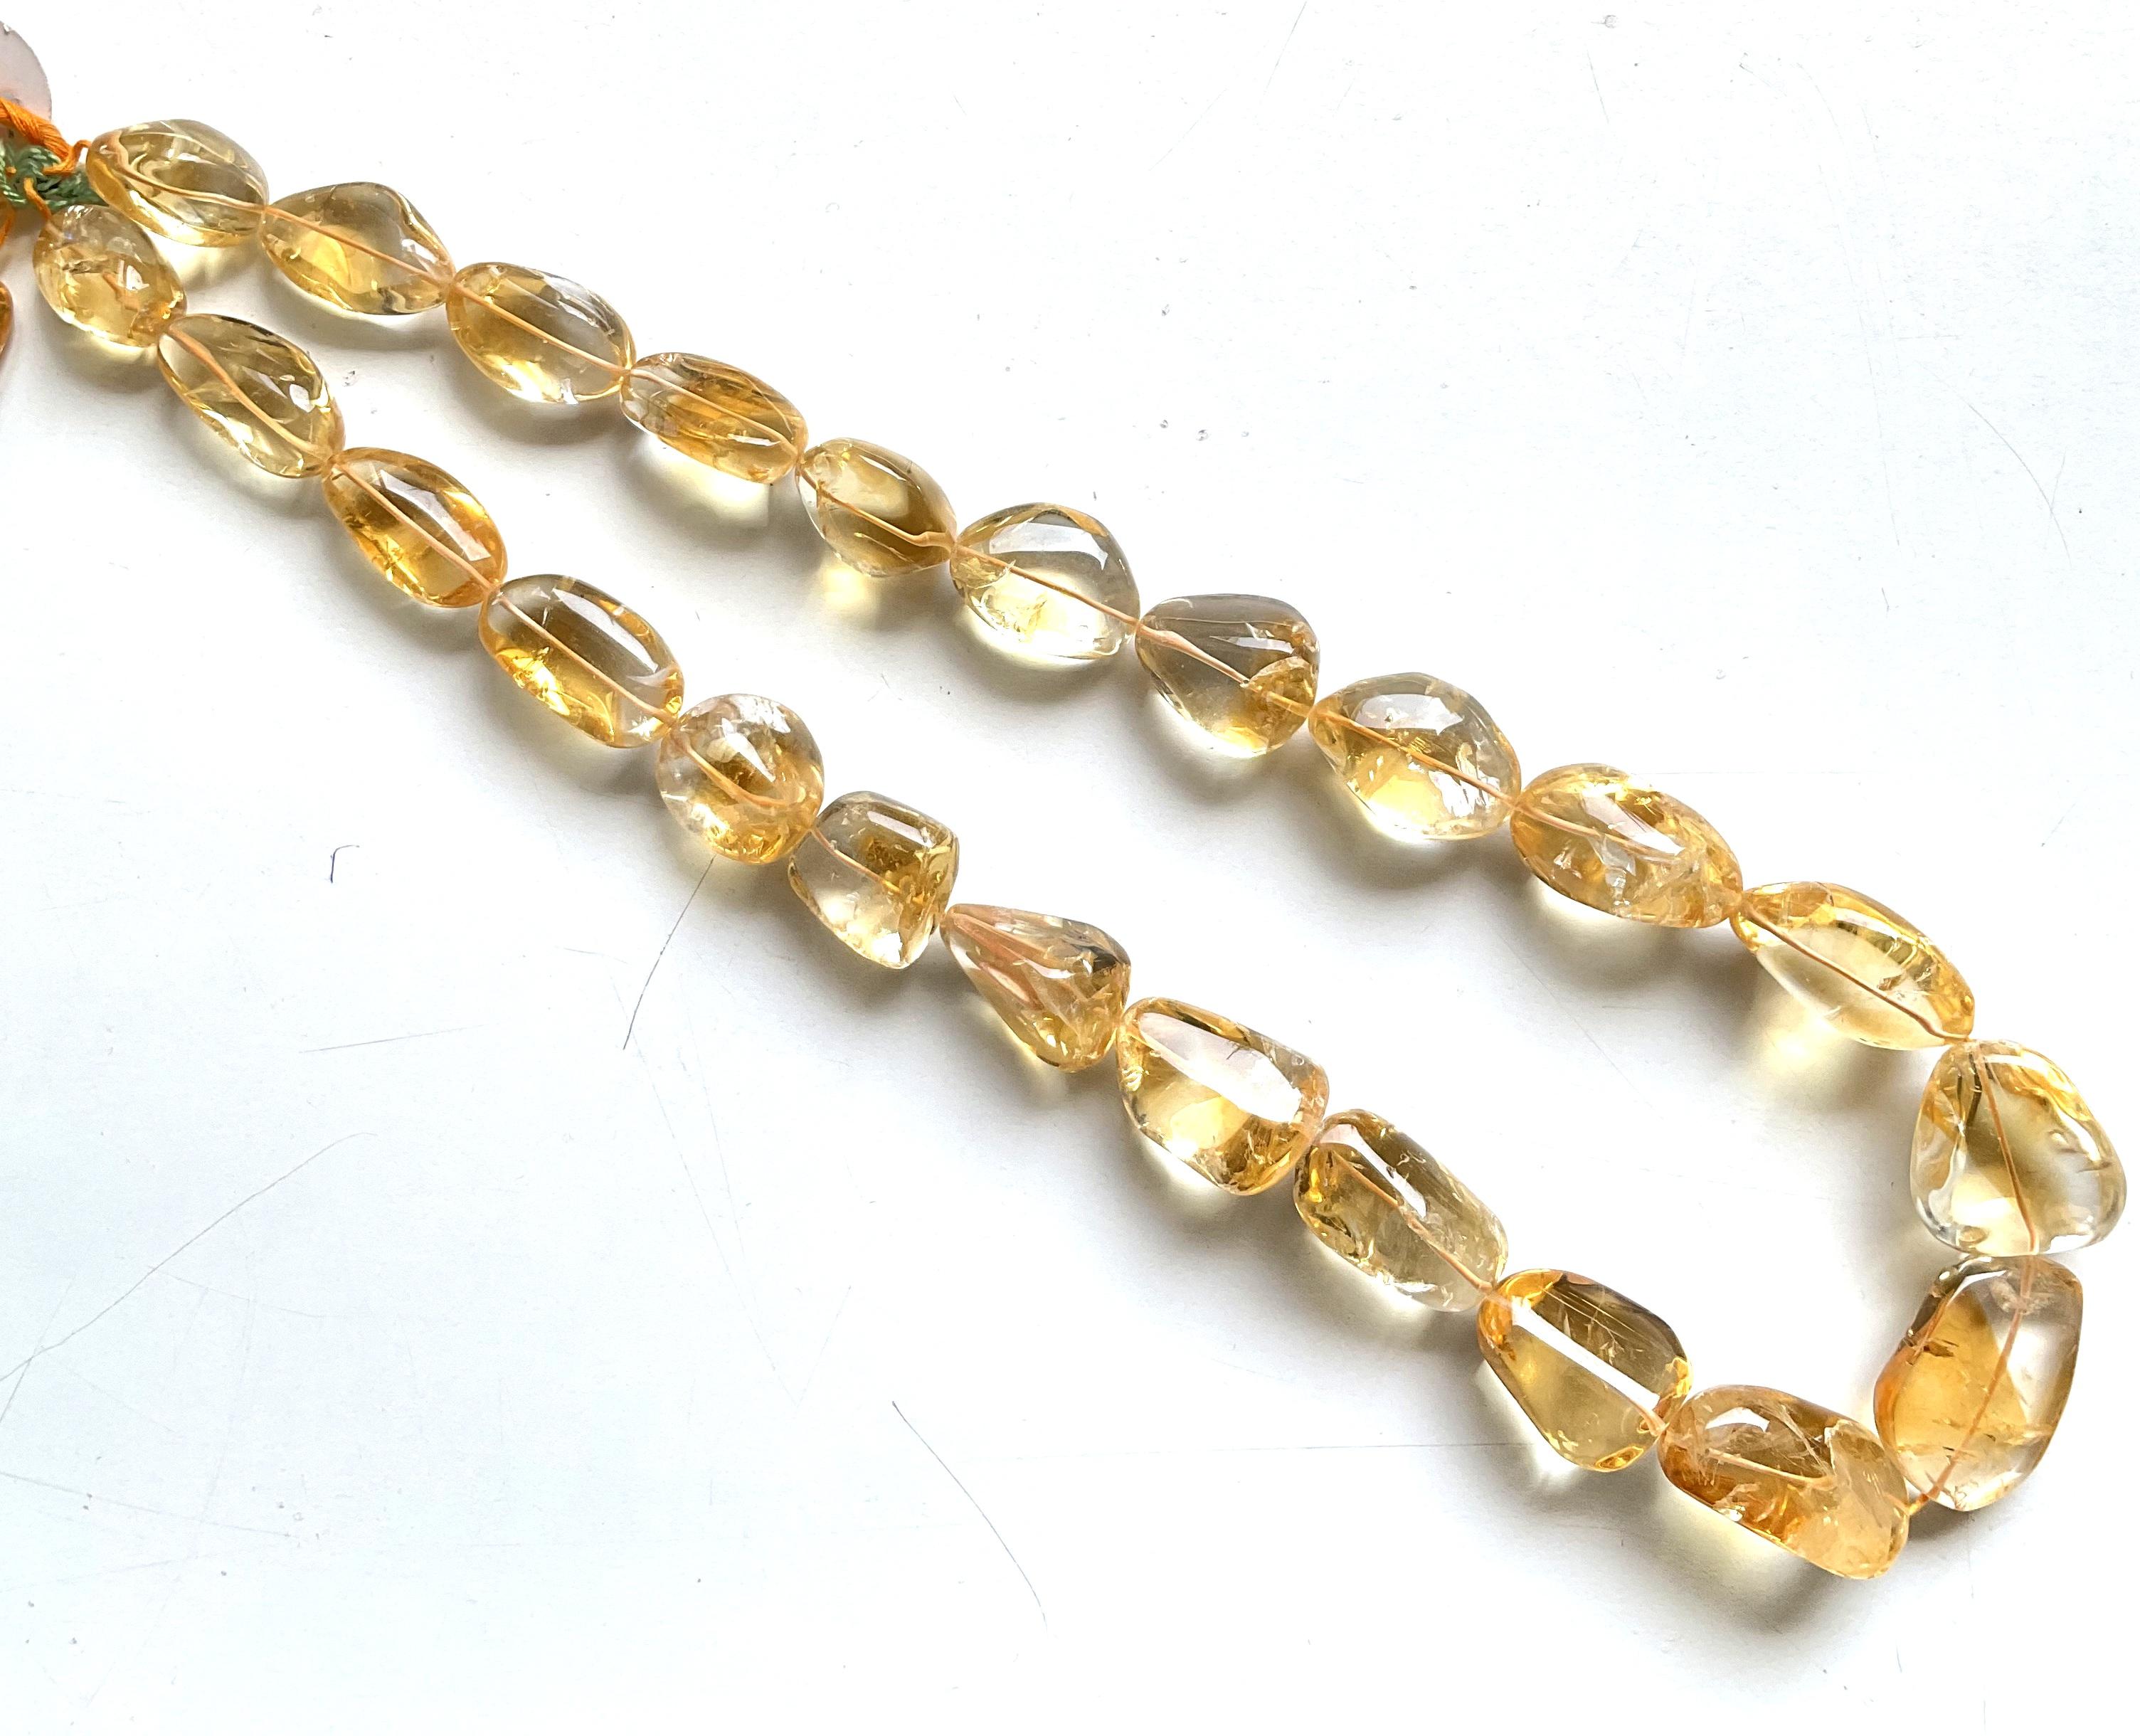 1157.00 carats big size citrine plain tumbled natural gemstone necklace

Gemstone - citrine
Size : 14x21 to 38x24 mm
Weight : 1157.00 Carats
Strand - 1 Line